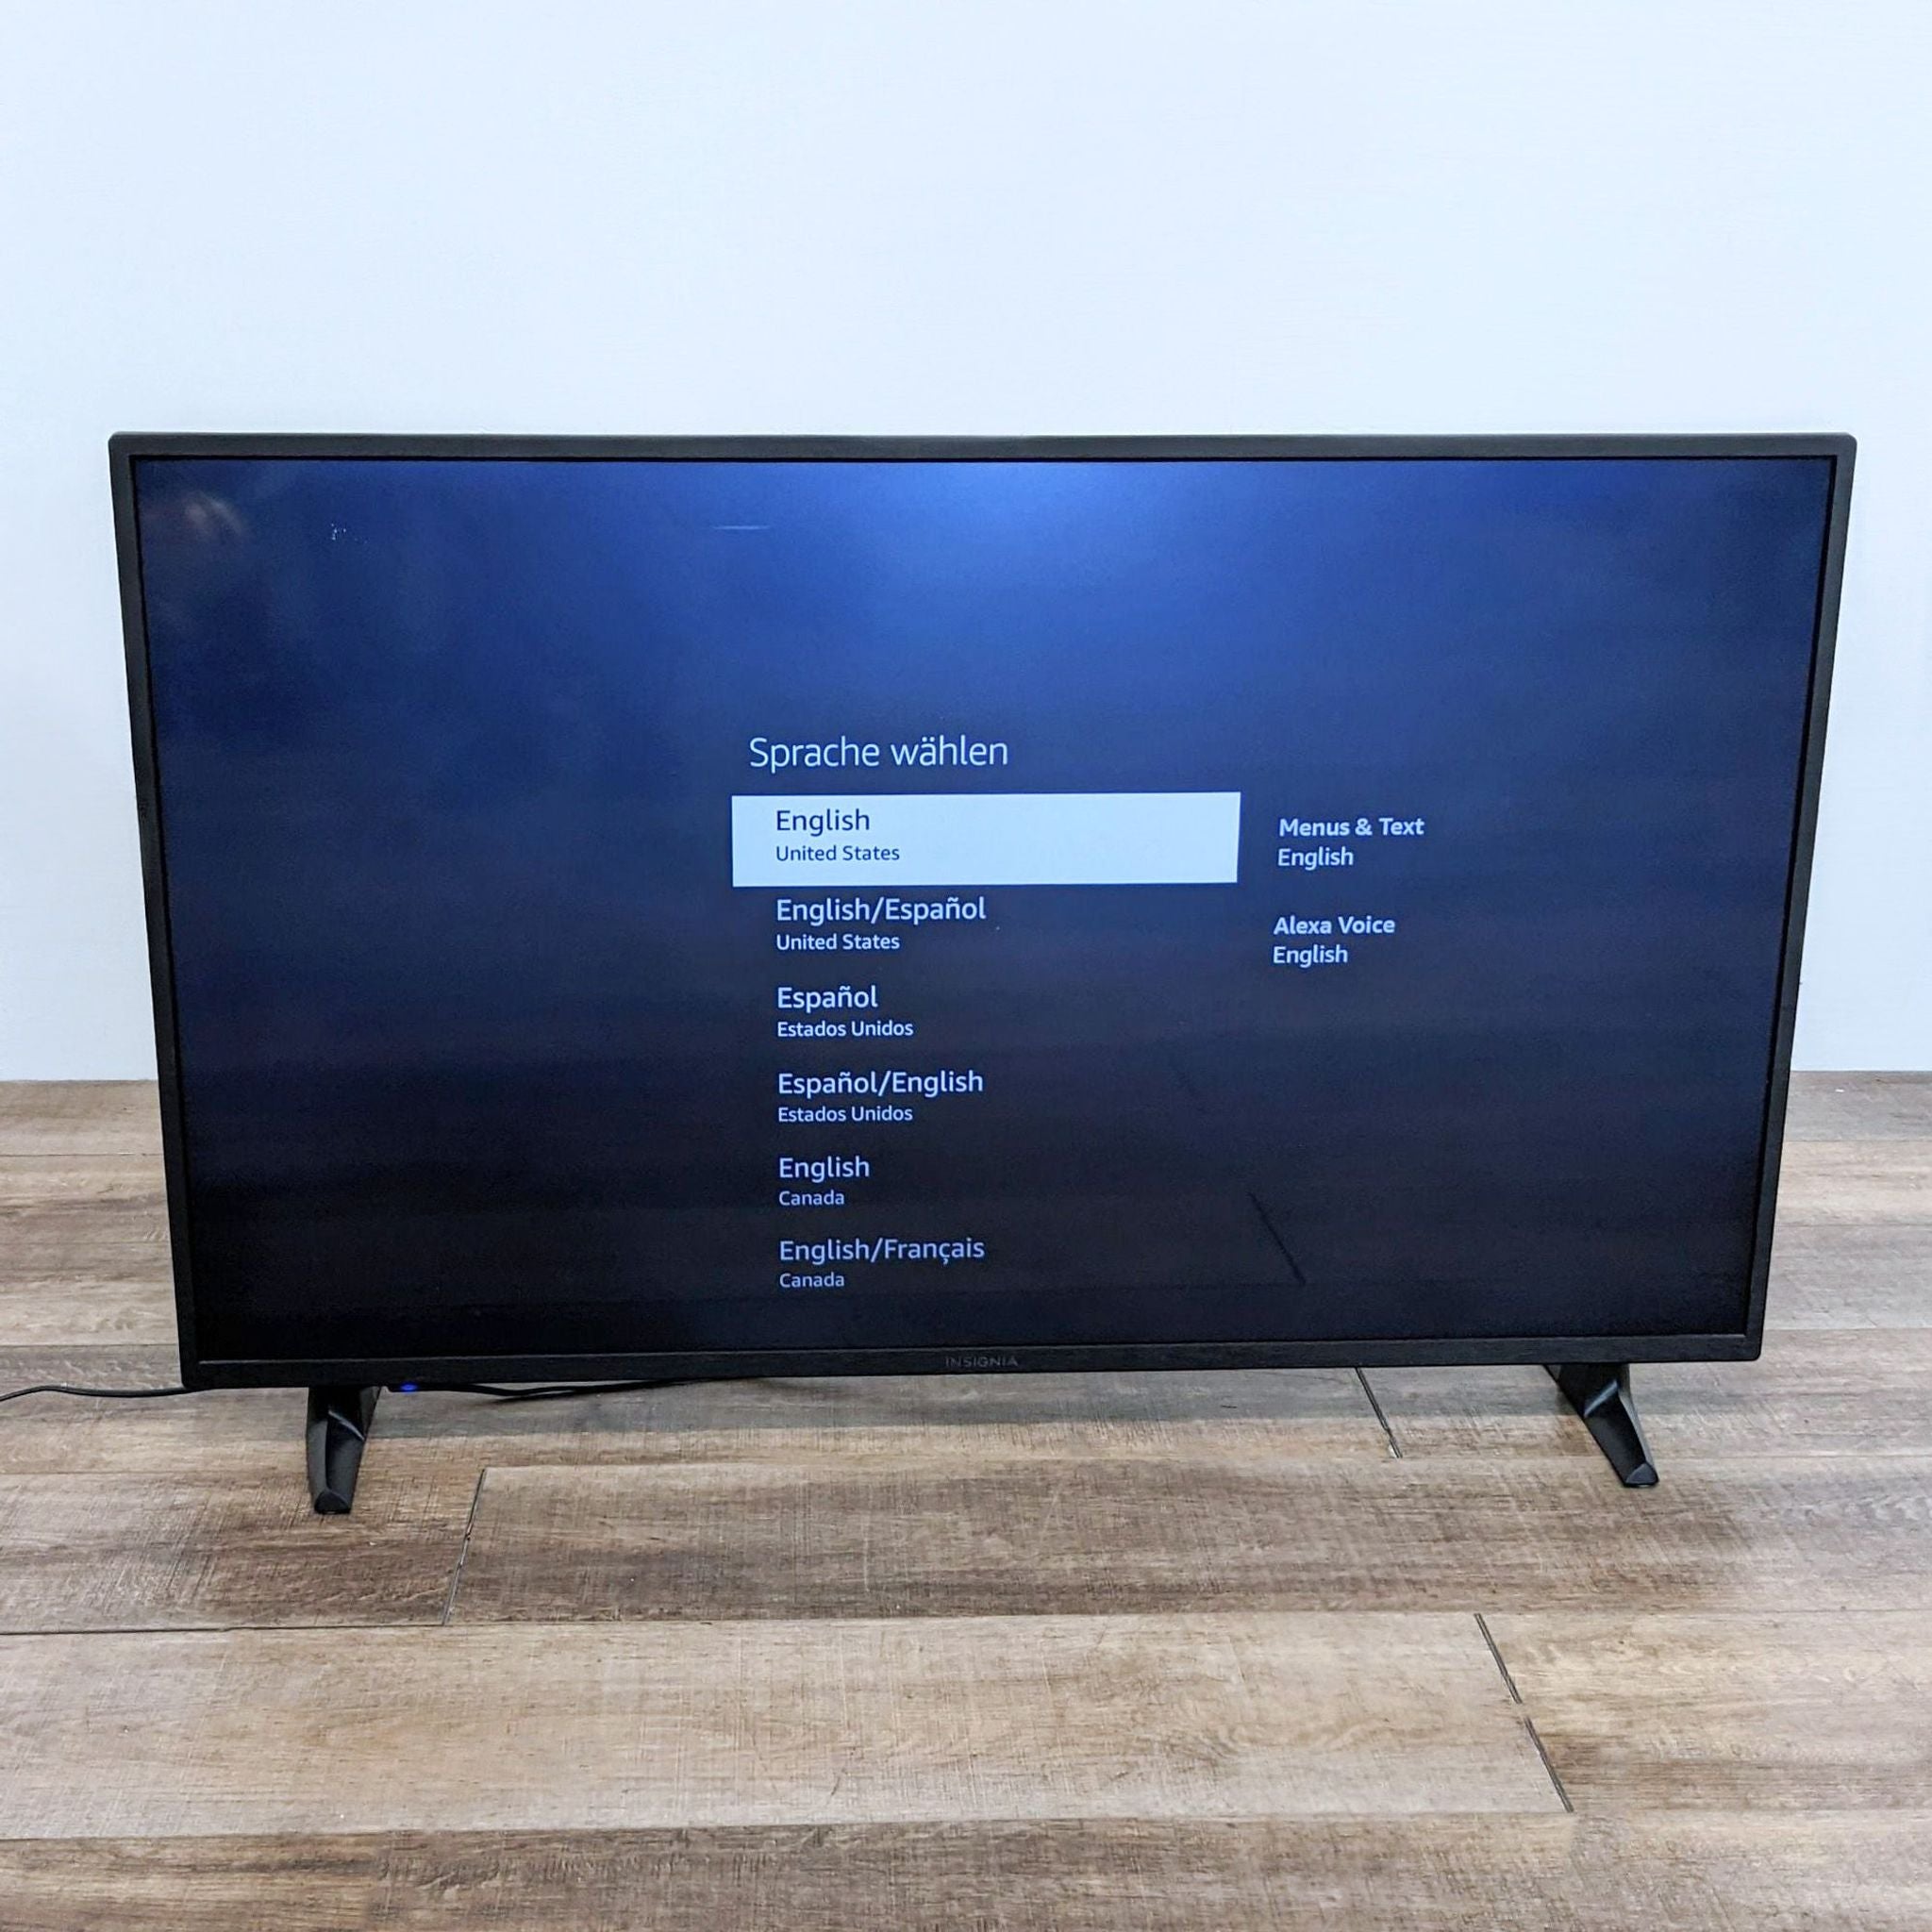 Insignia 4K UHD Fire TV displaying language selection menu with English highlighted, on a wood floor.